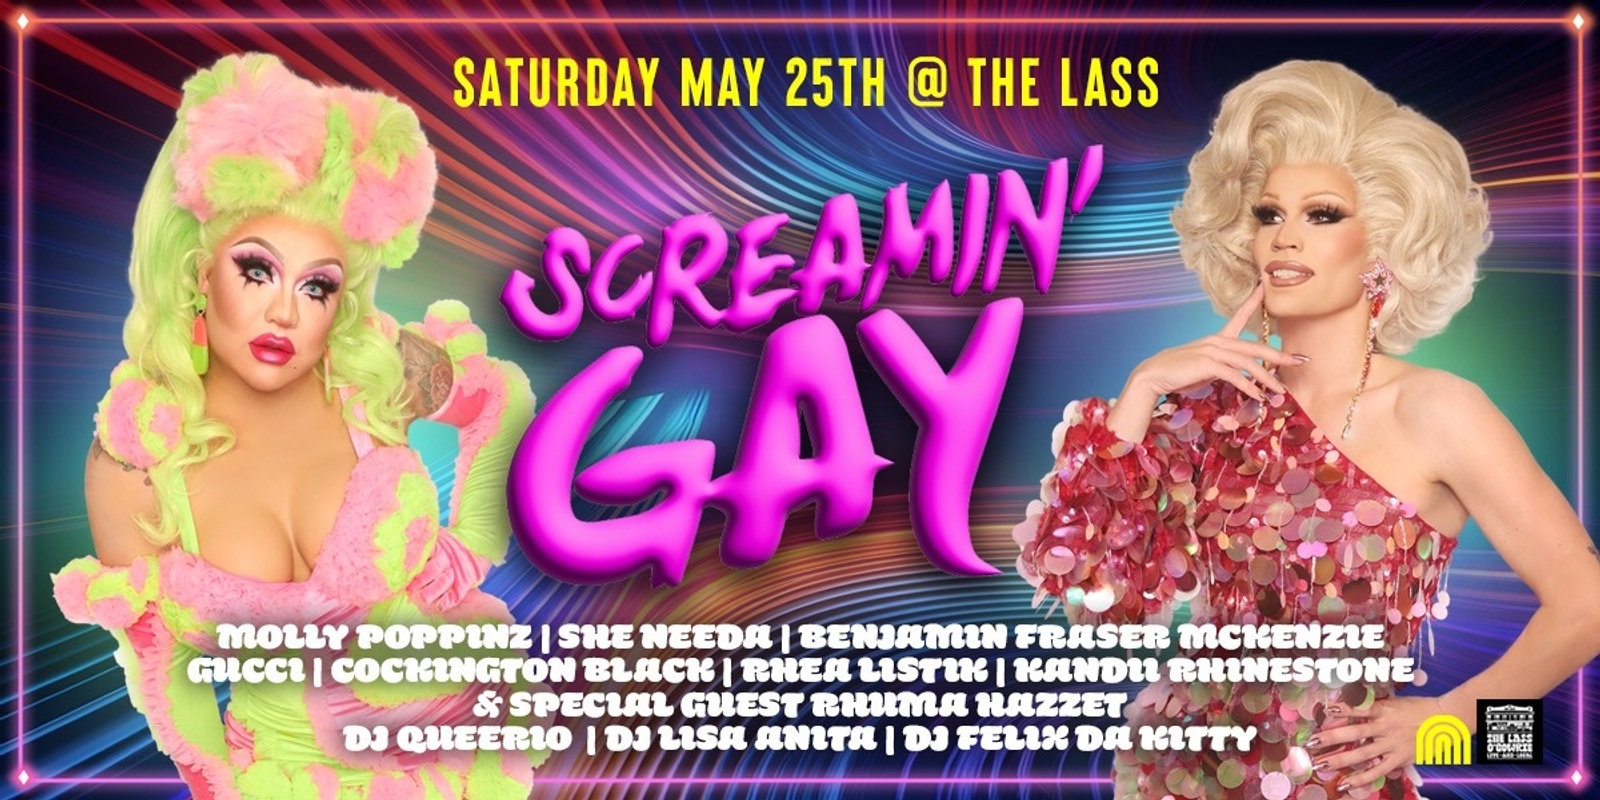 Banner image for Screamin Gay May @ the Lass - Dunny's Farewell